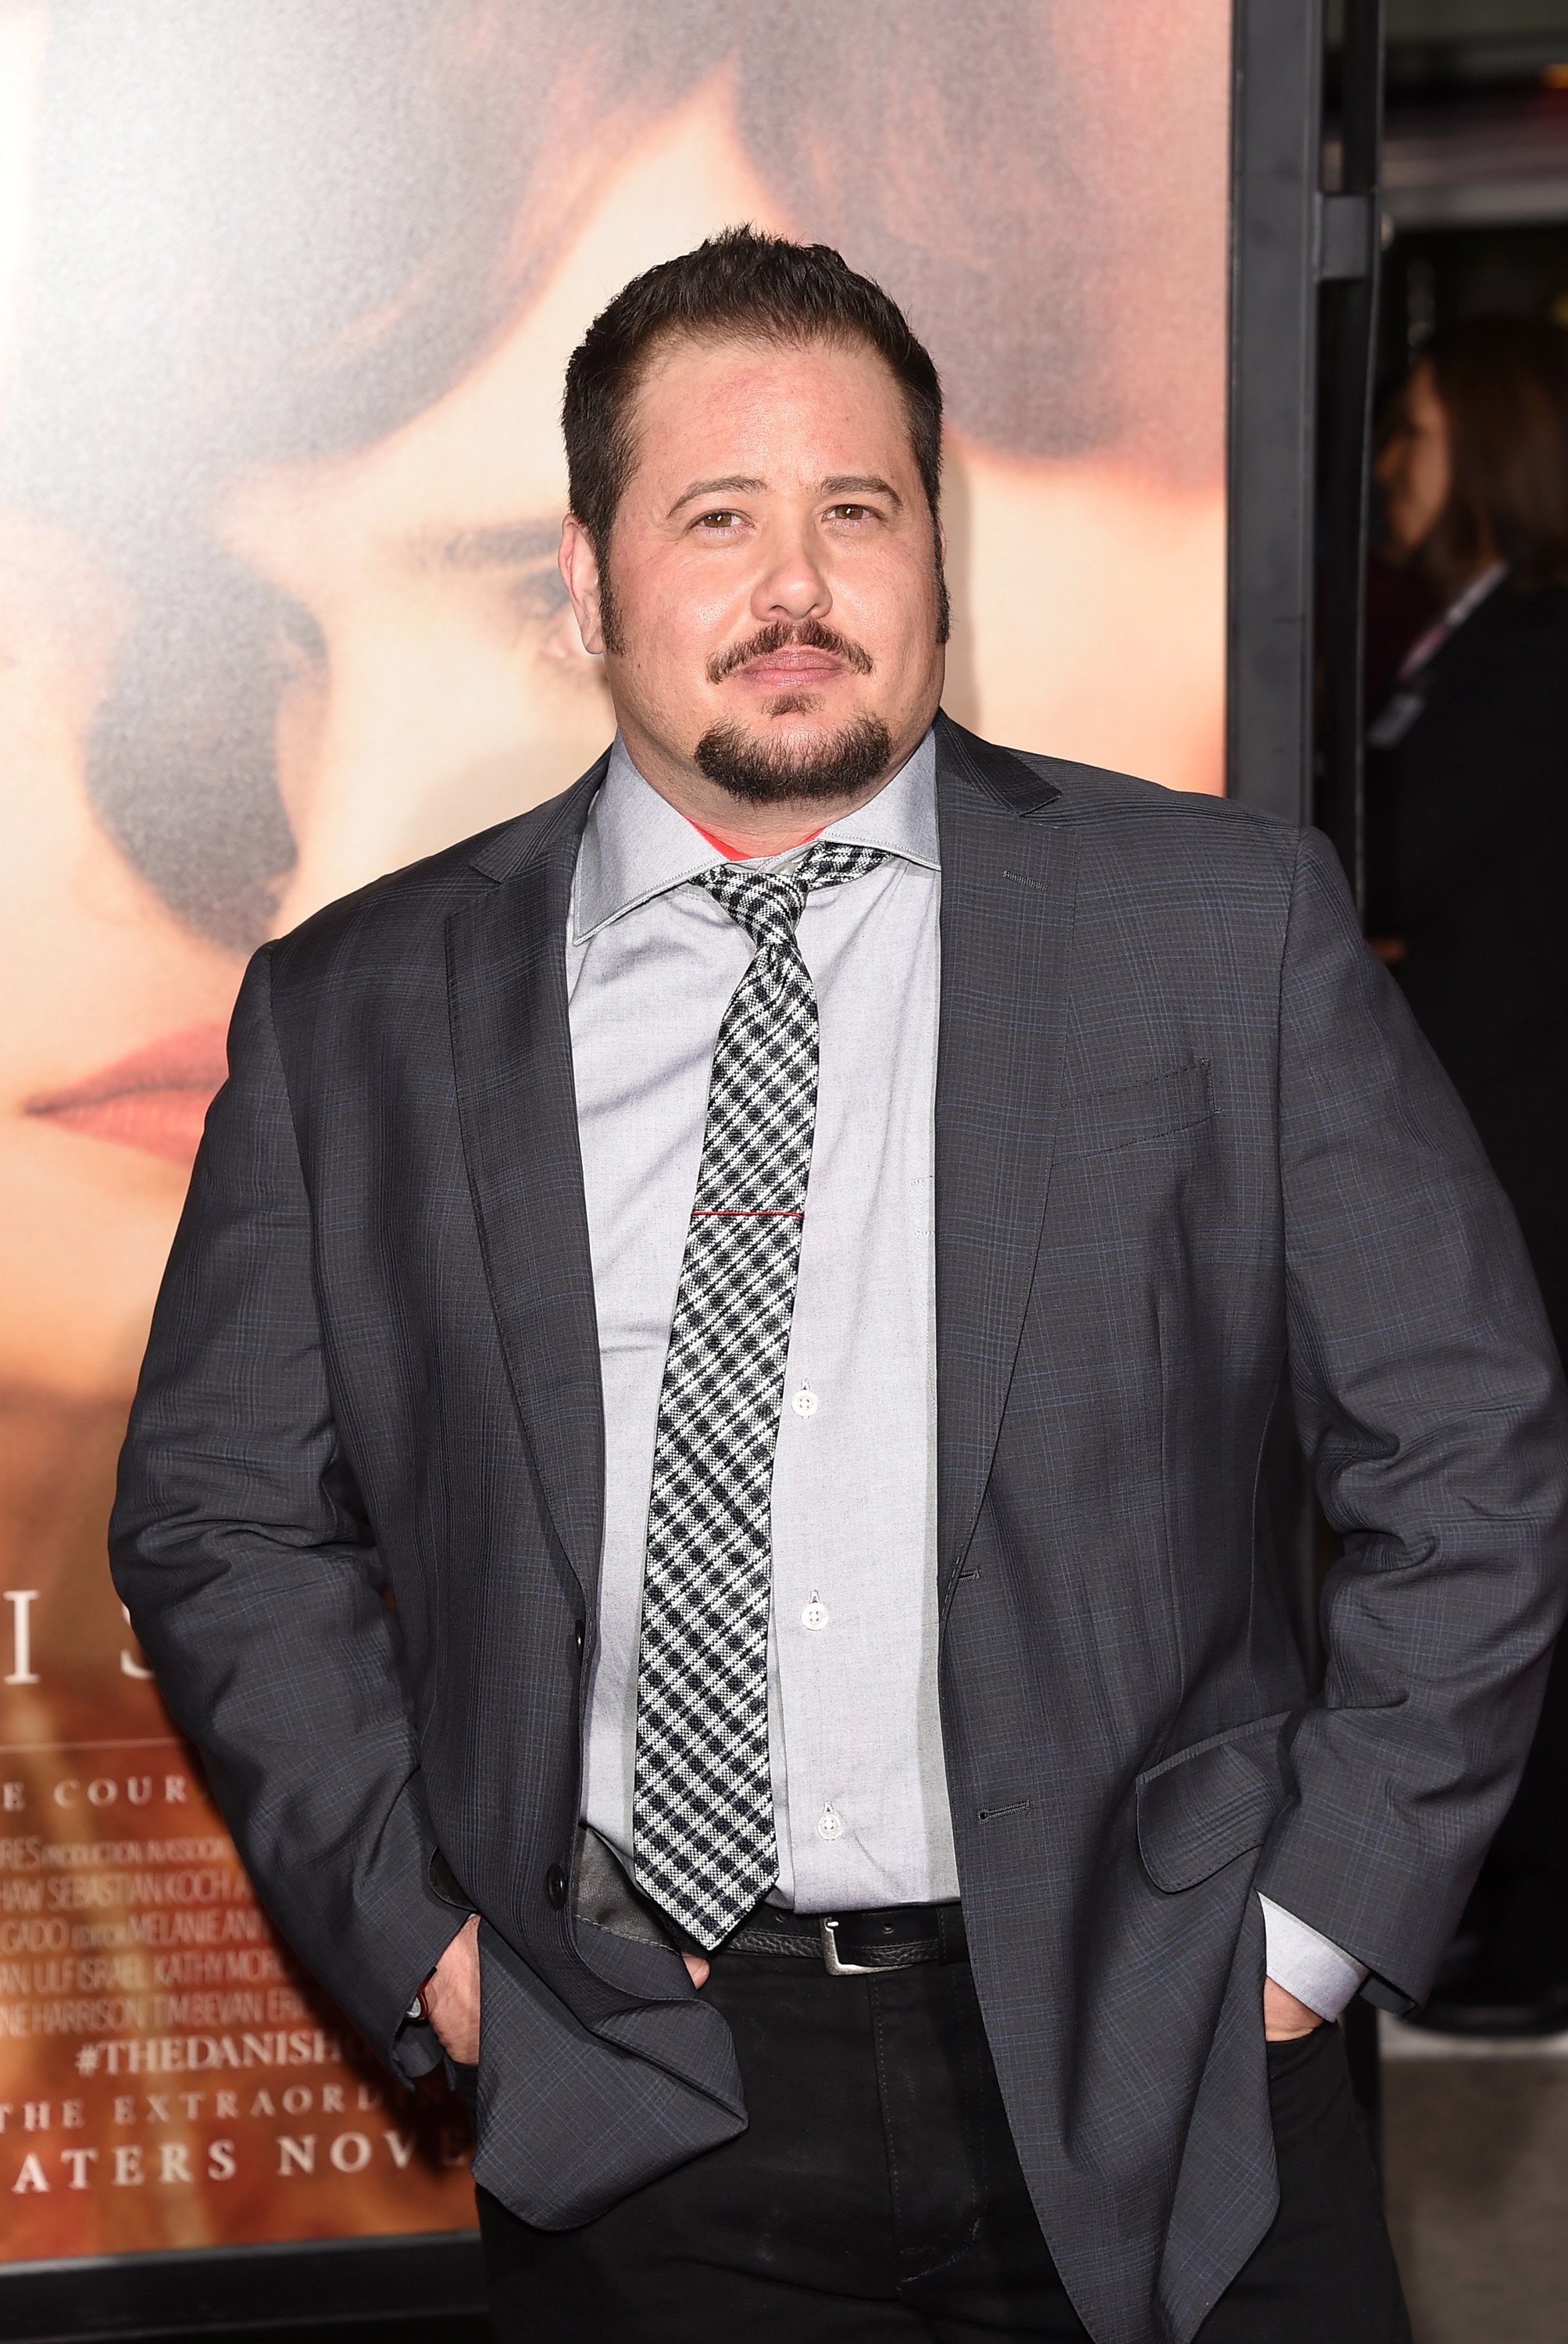 Chaz Bono attends the premiere of Focus Features' "The Danish Girl" at Westwood Village Theatre on November 21, 2015 | Photo: GettyImages